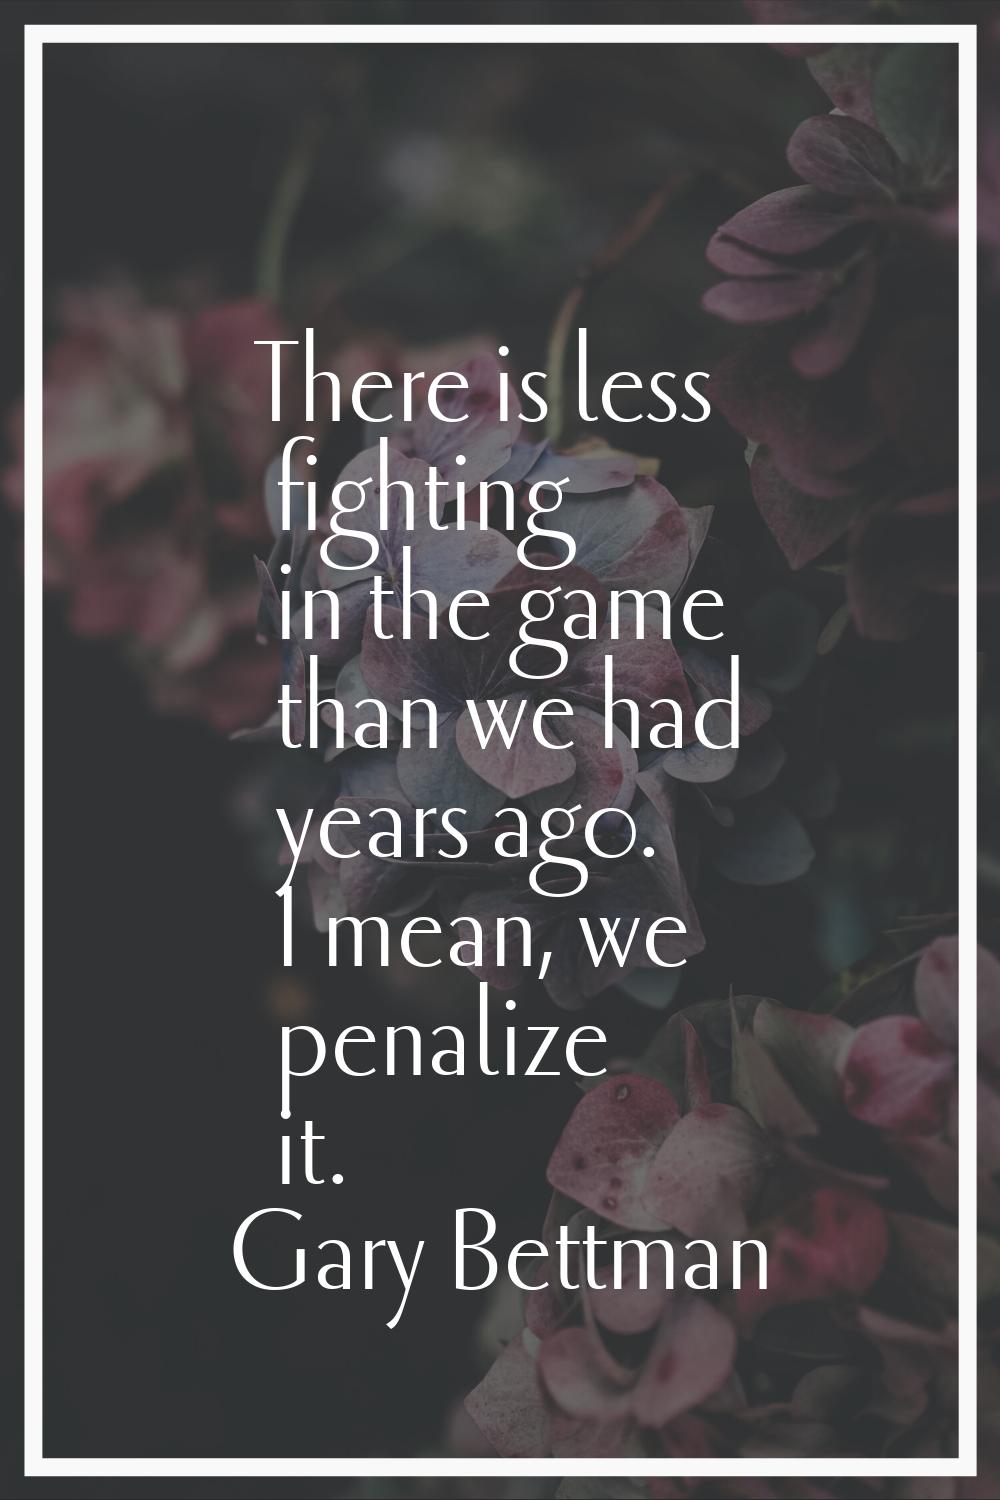 There is less fighting in the game than we had years ago. I mean, we penalize it.